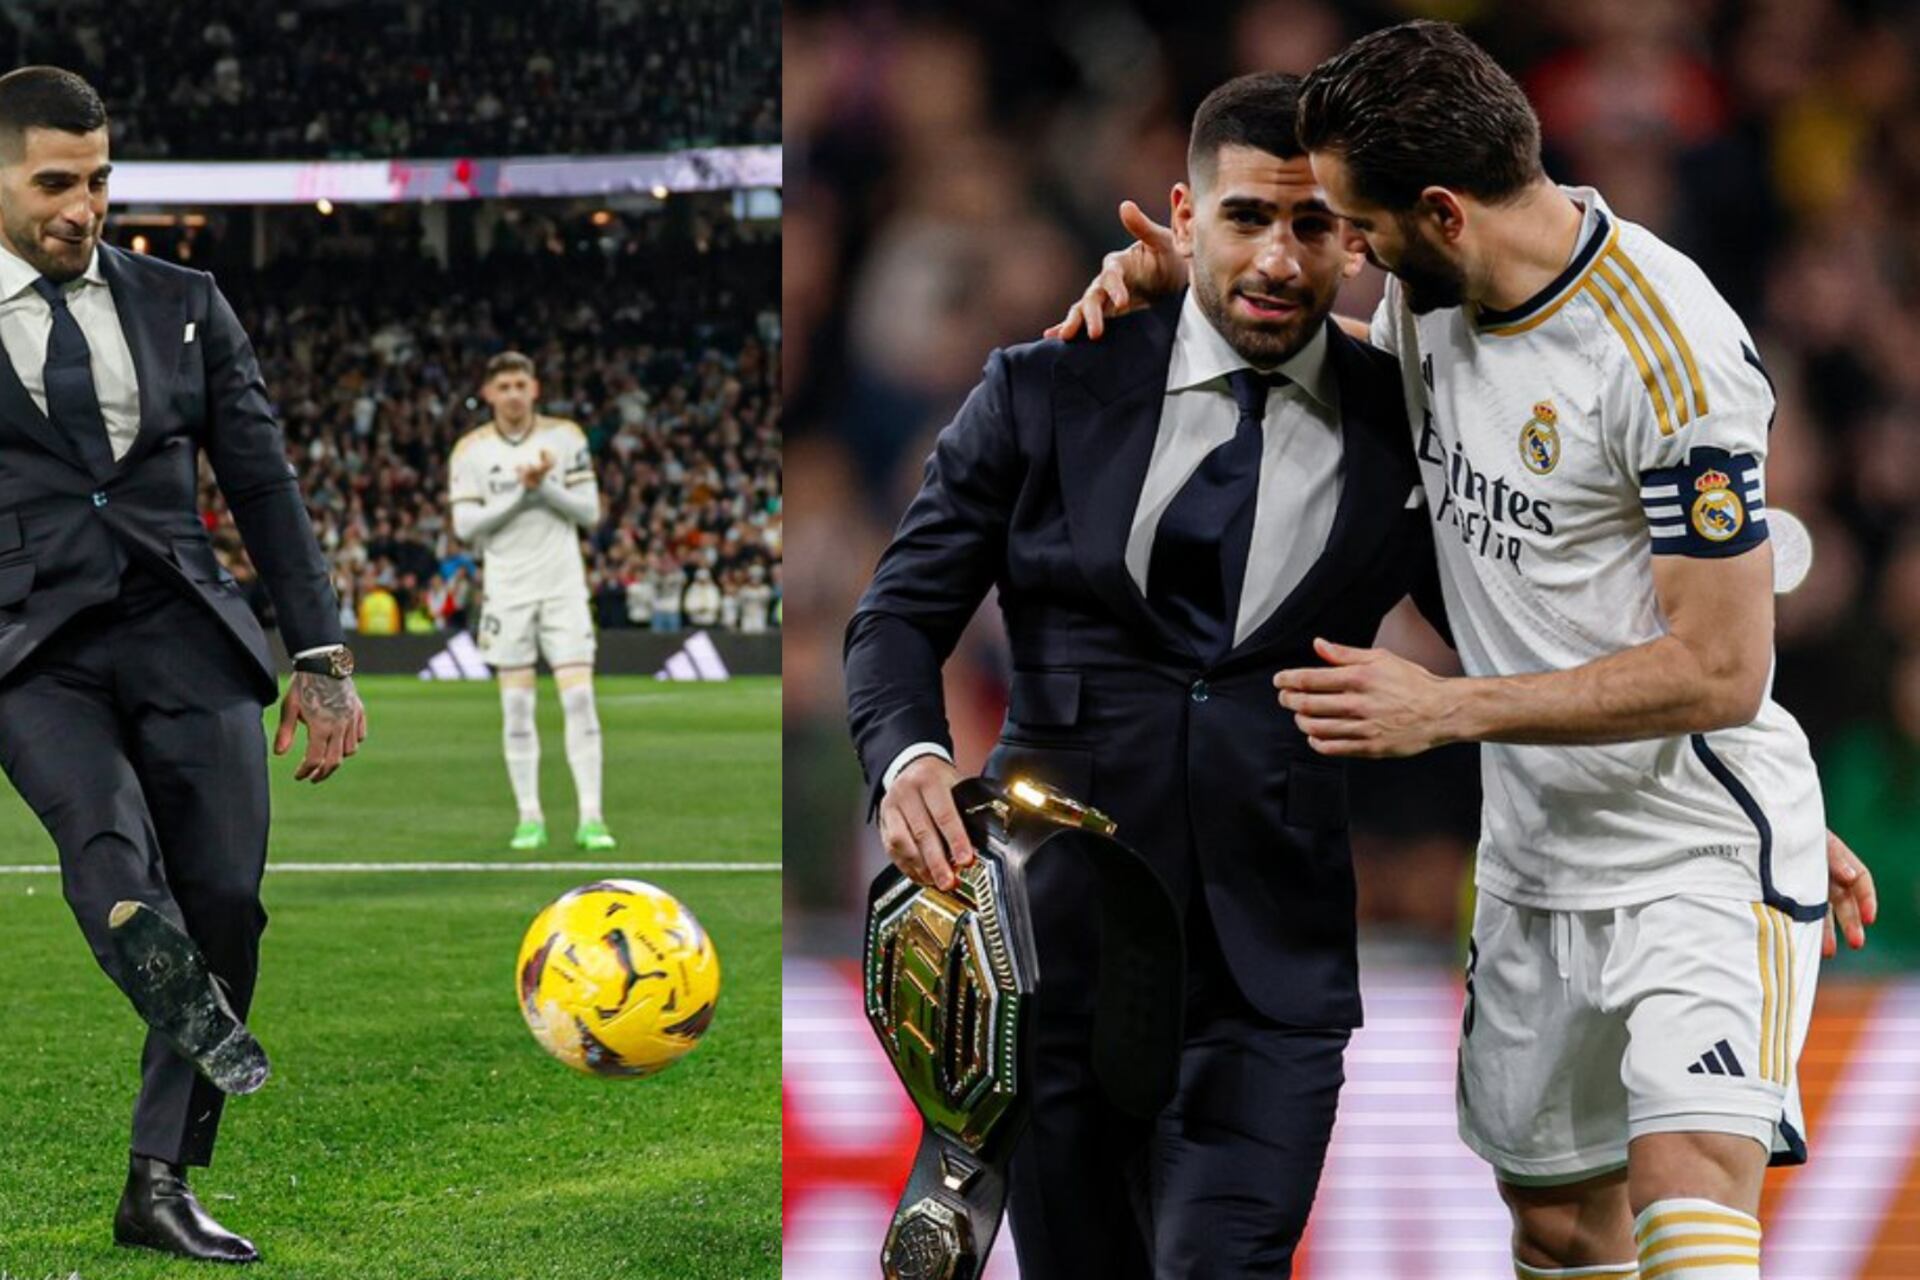 (VIDEO) UFC Champion Ilia Topuria does honorary kick off for Real Madrid